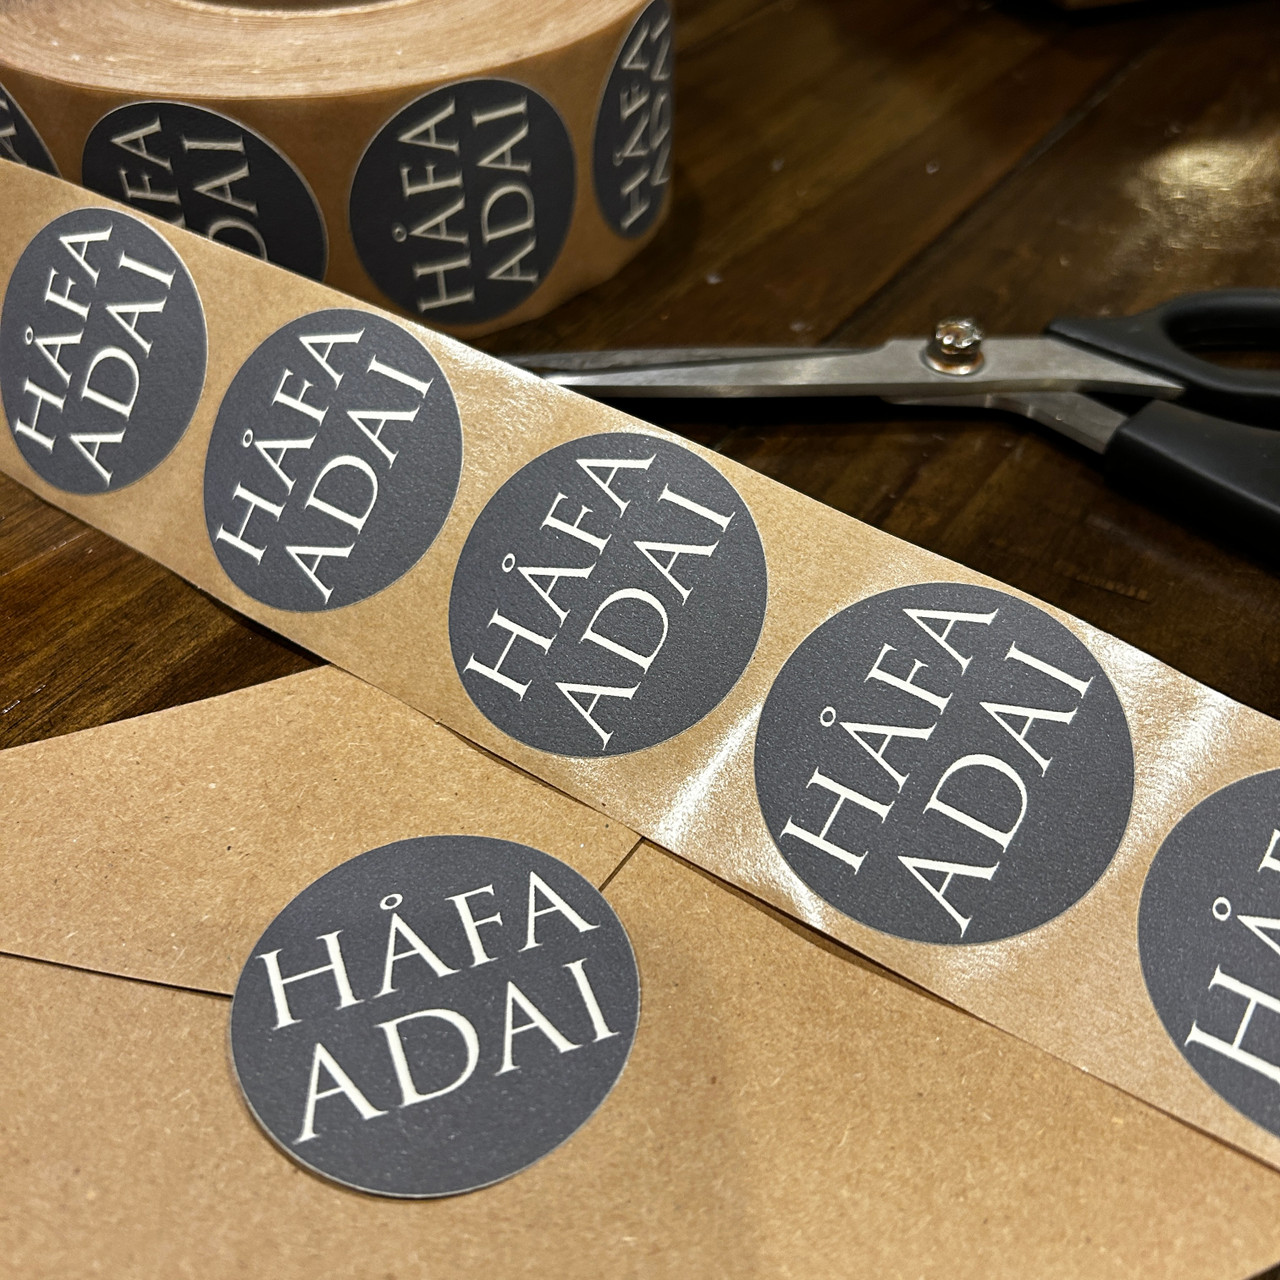 1.5 Hafa Adai Stickers for Envelopes, Gifts, and for Party Favors